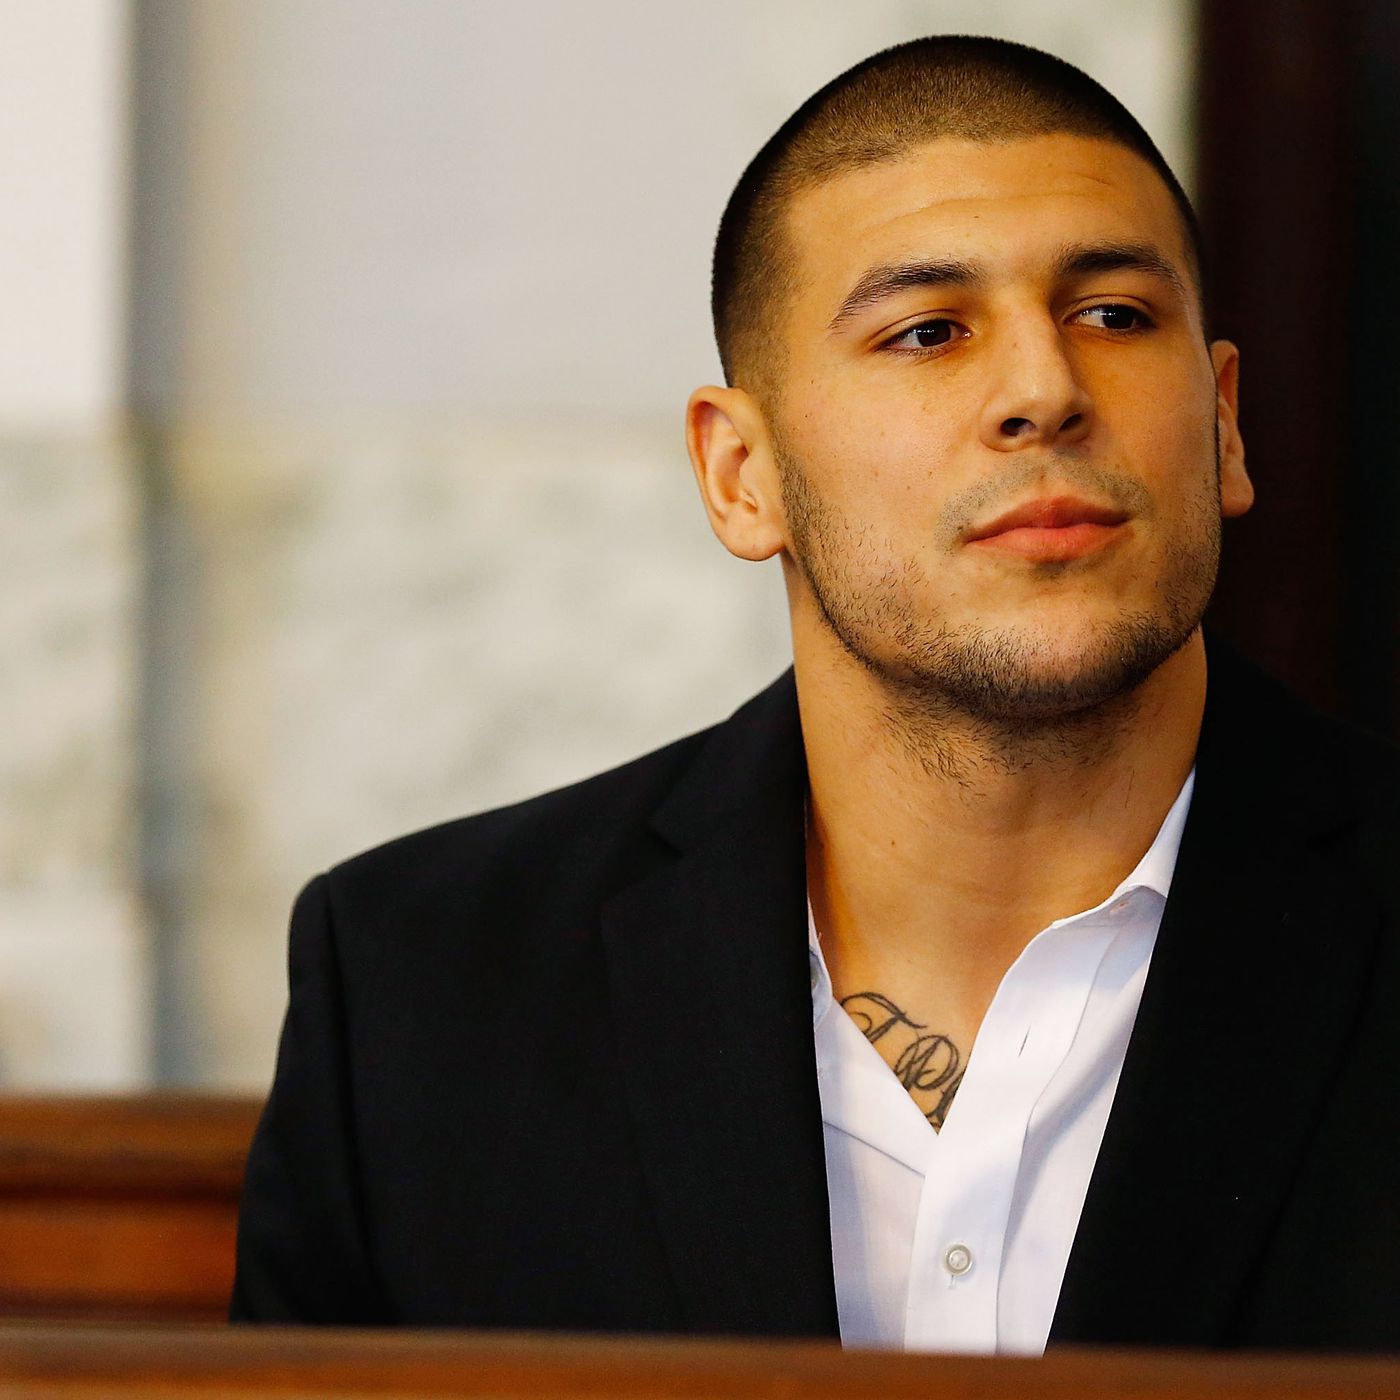 Aaron Hernandez. Played tight end for the New England Patriots. Fresh off a new contract. Killed his friend, found guilty, then took his own life during the appeal. u/c_c_c_combobreaker